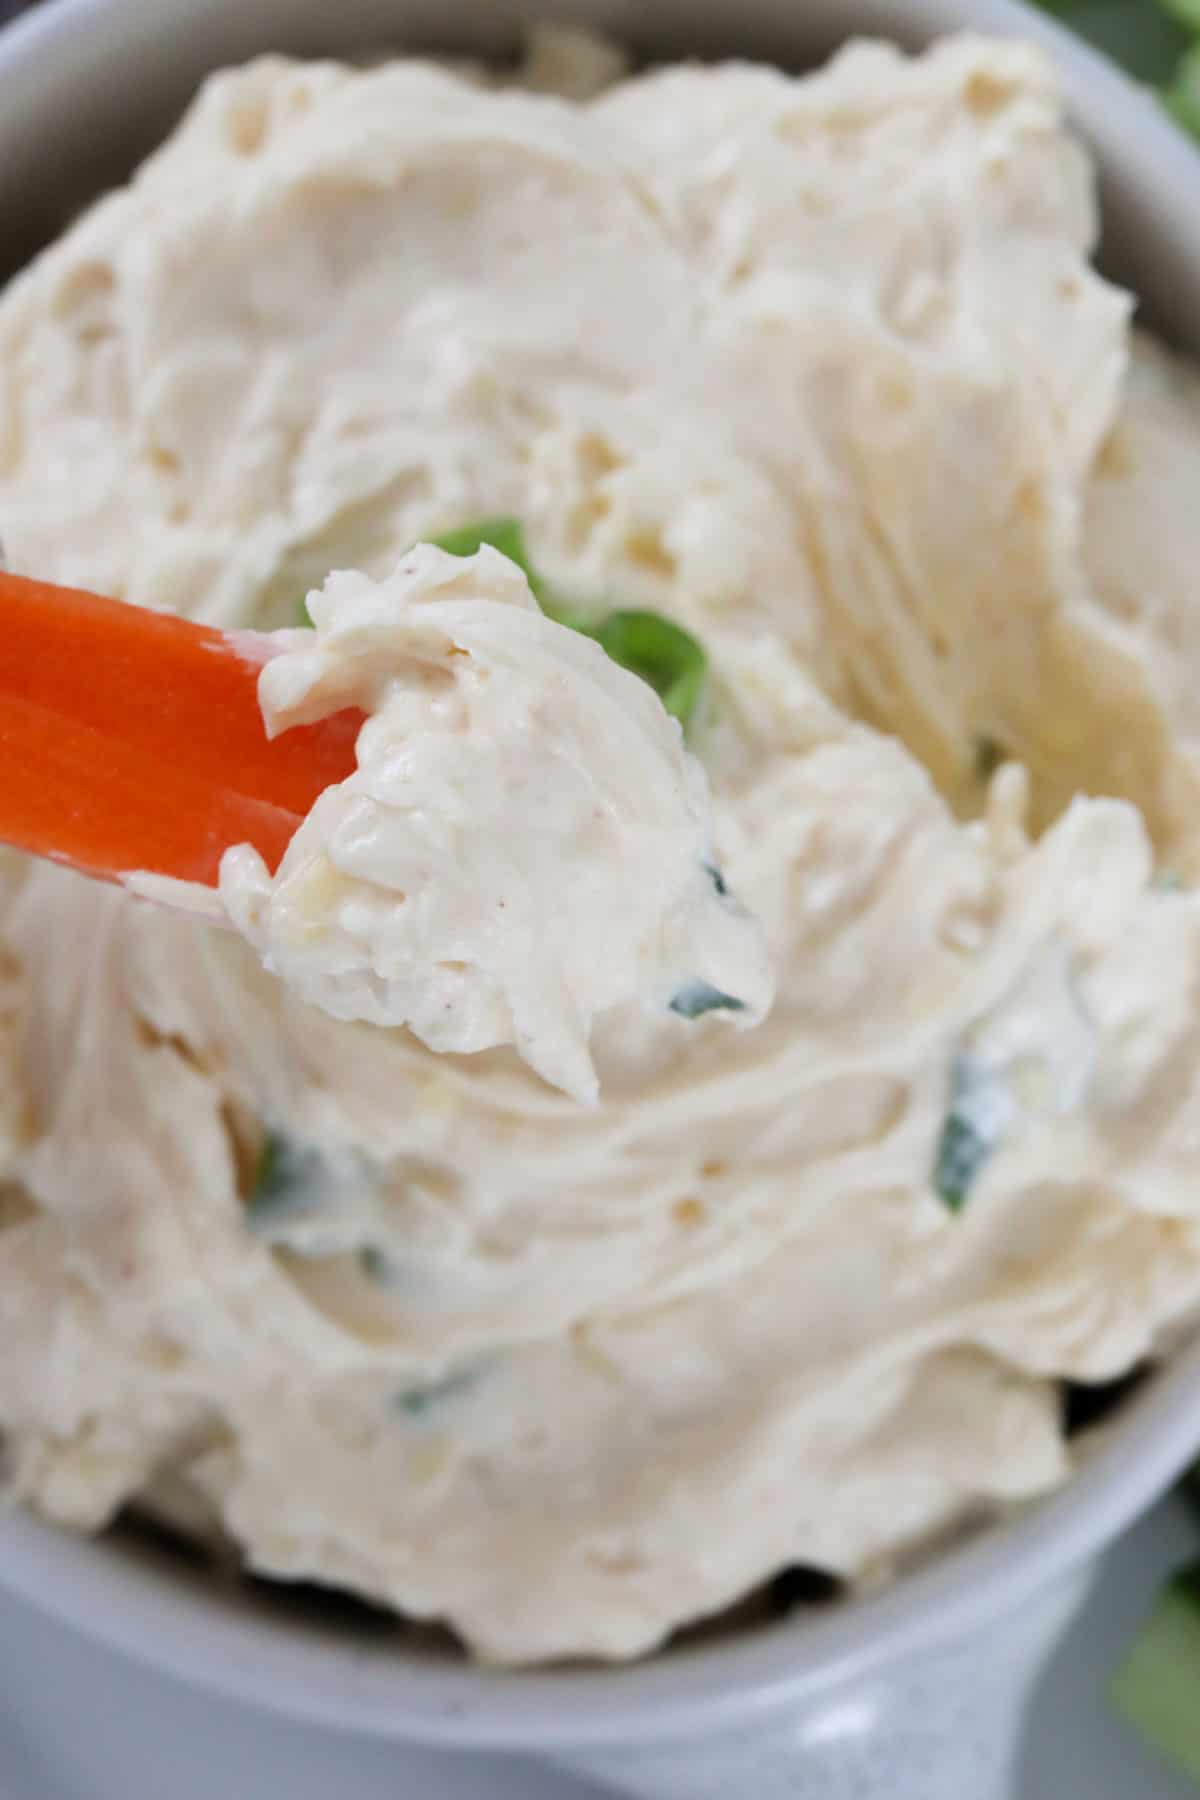 Close up image of a carrot dipping into a cream cheese dip.